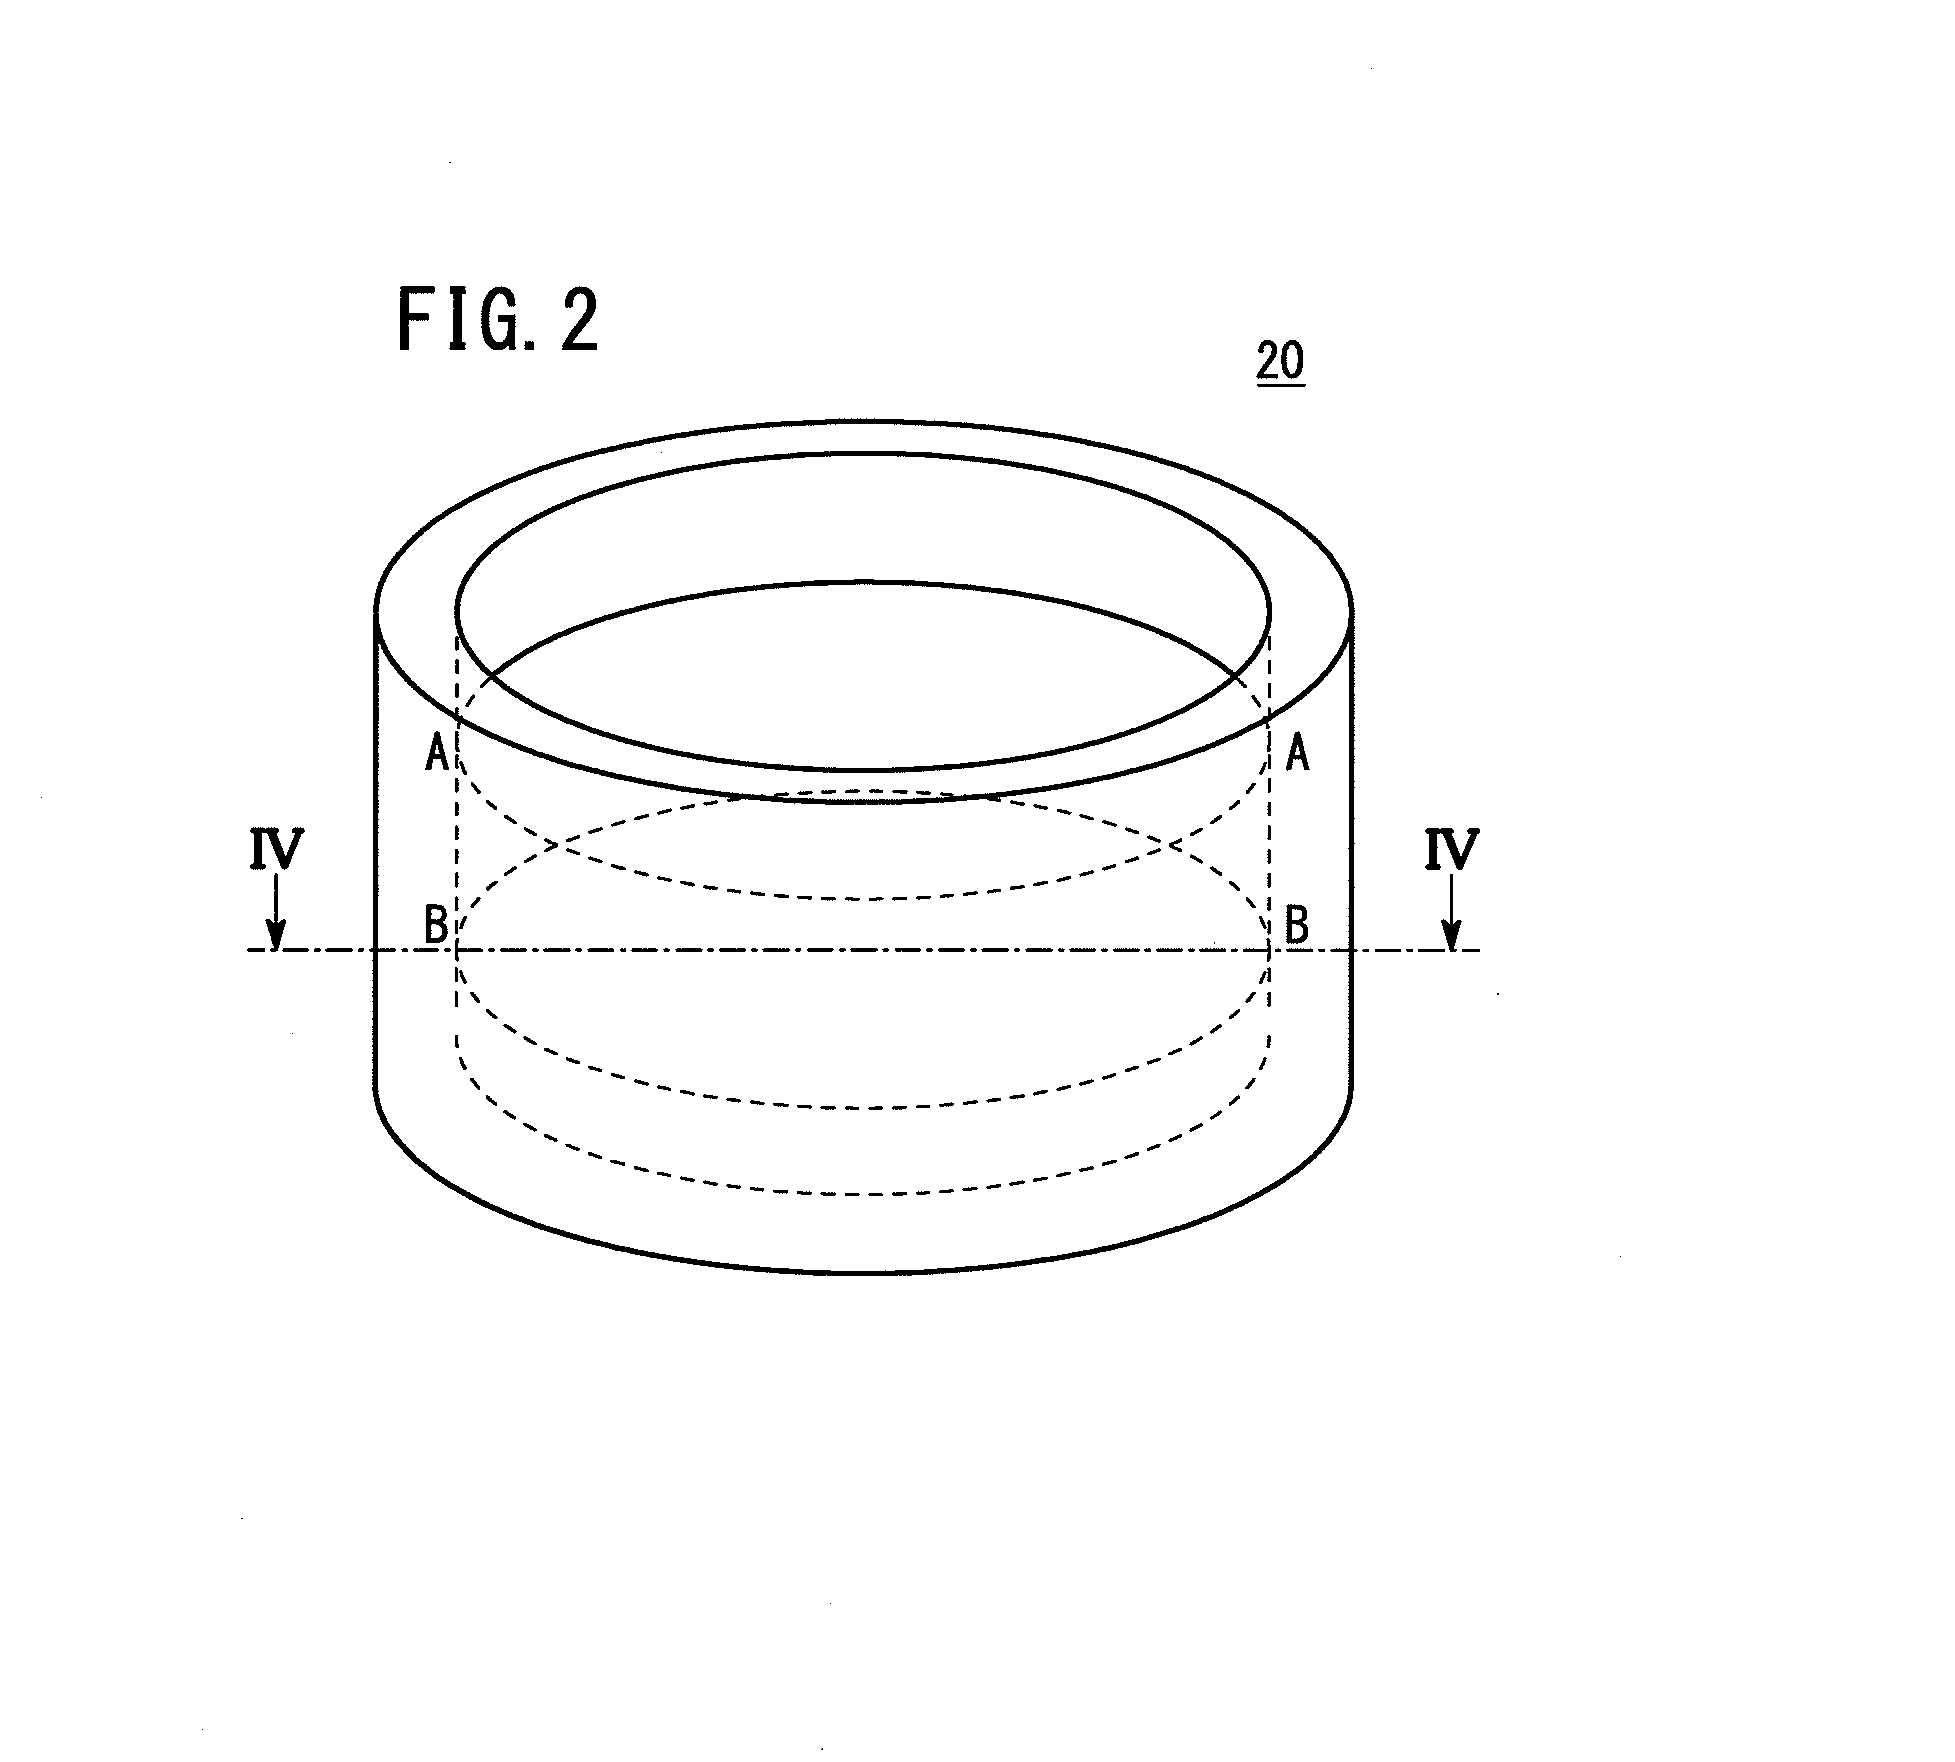 Method of evaluating dispersion degrees of mixed epoxy resins